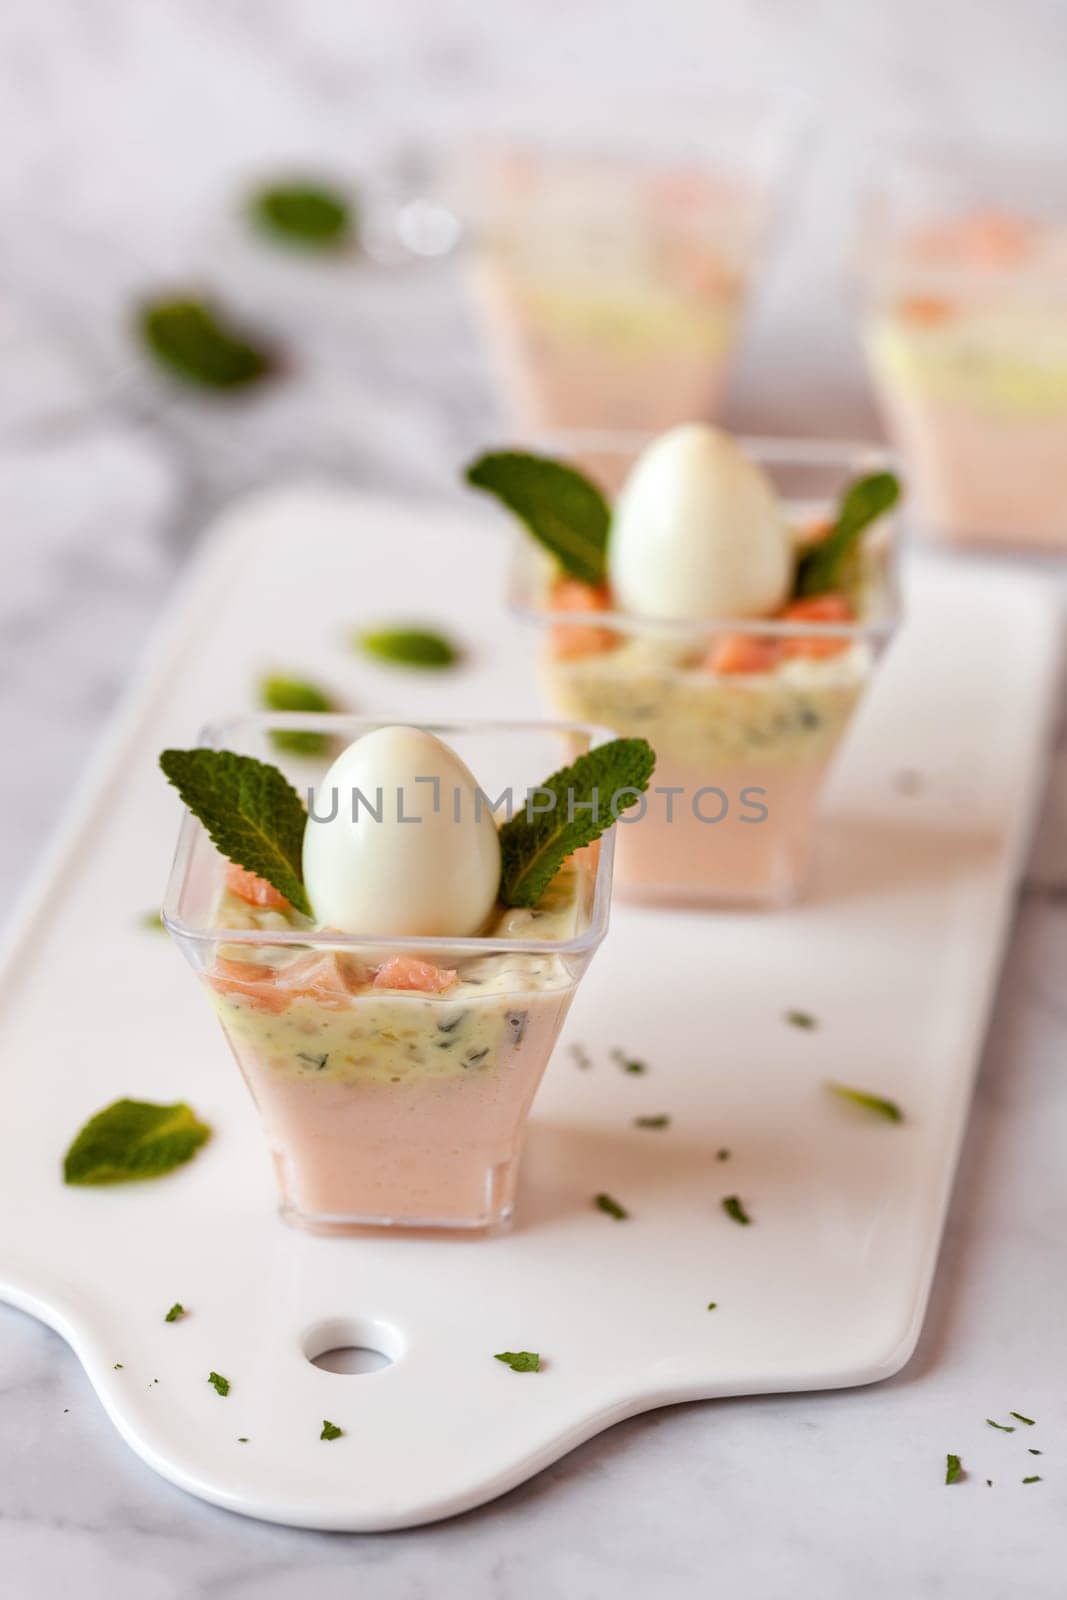 Salmon and cream mousse decorated with mint leaves, Easter appetizer by lanych